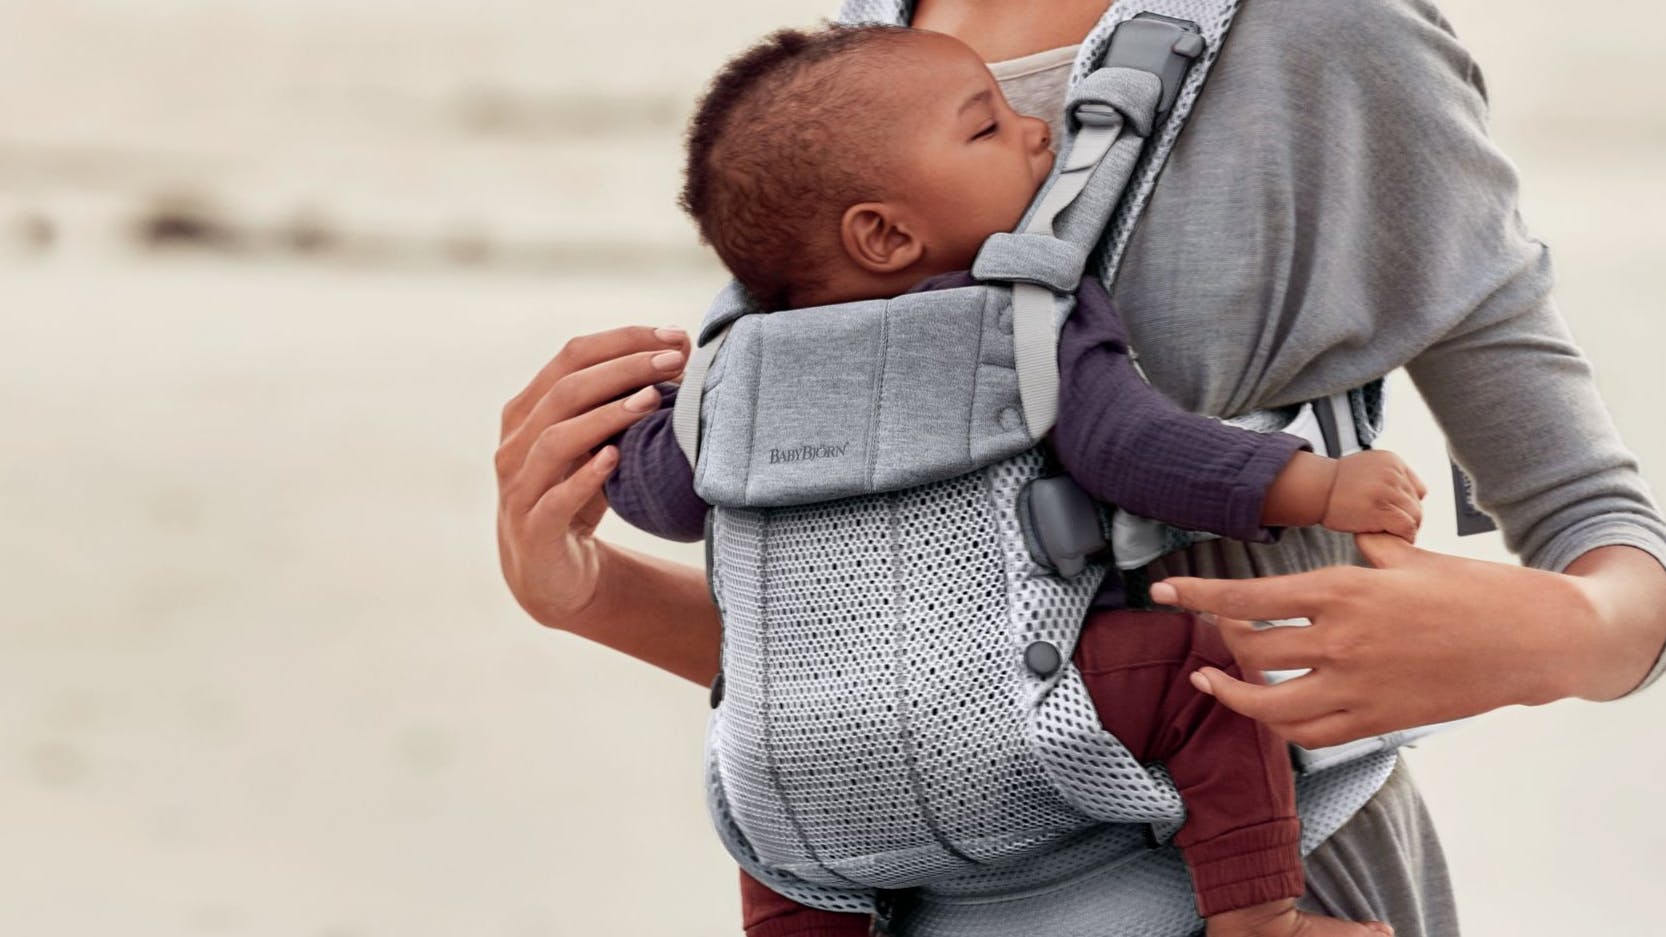 A woman walks on the beach while holding a baby in the BabyBjörn Baby Carrier Harmony.